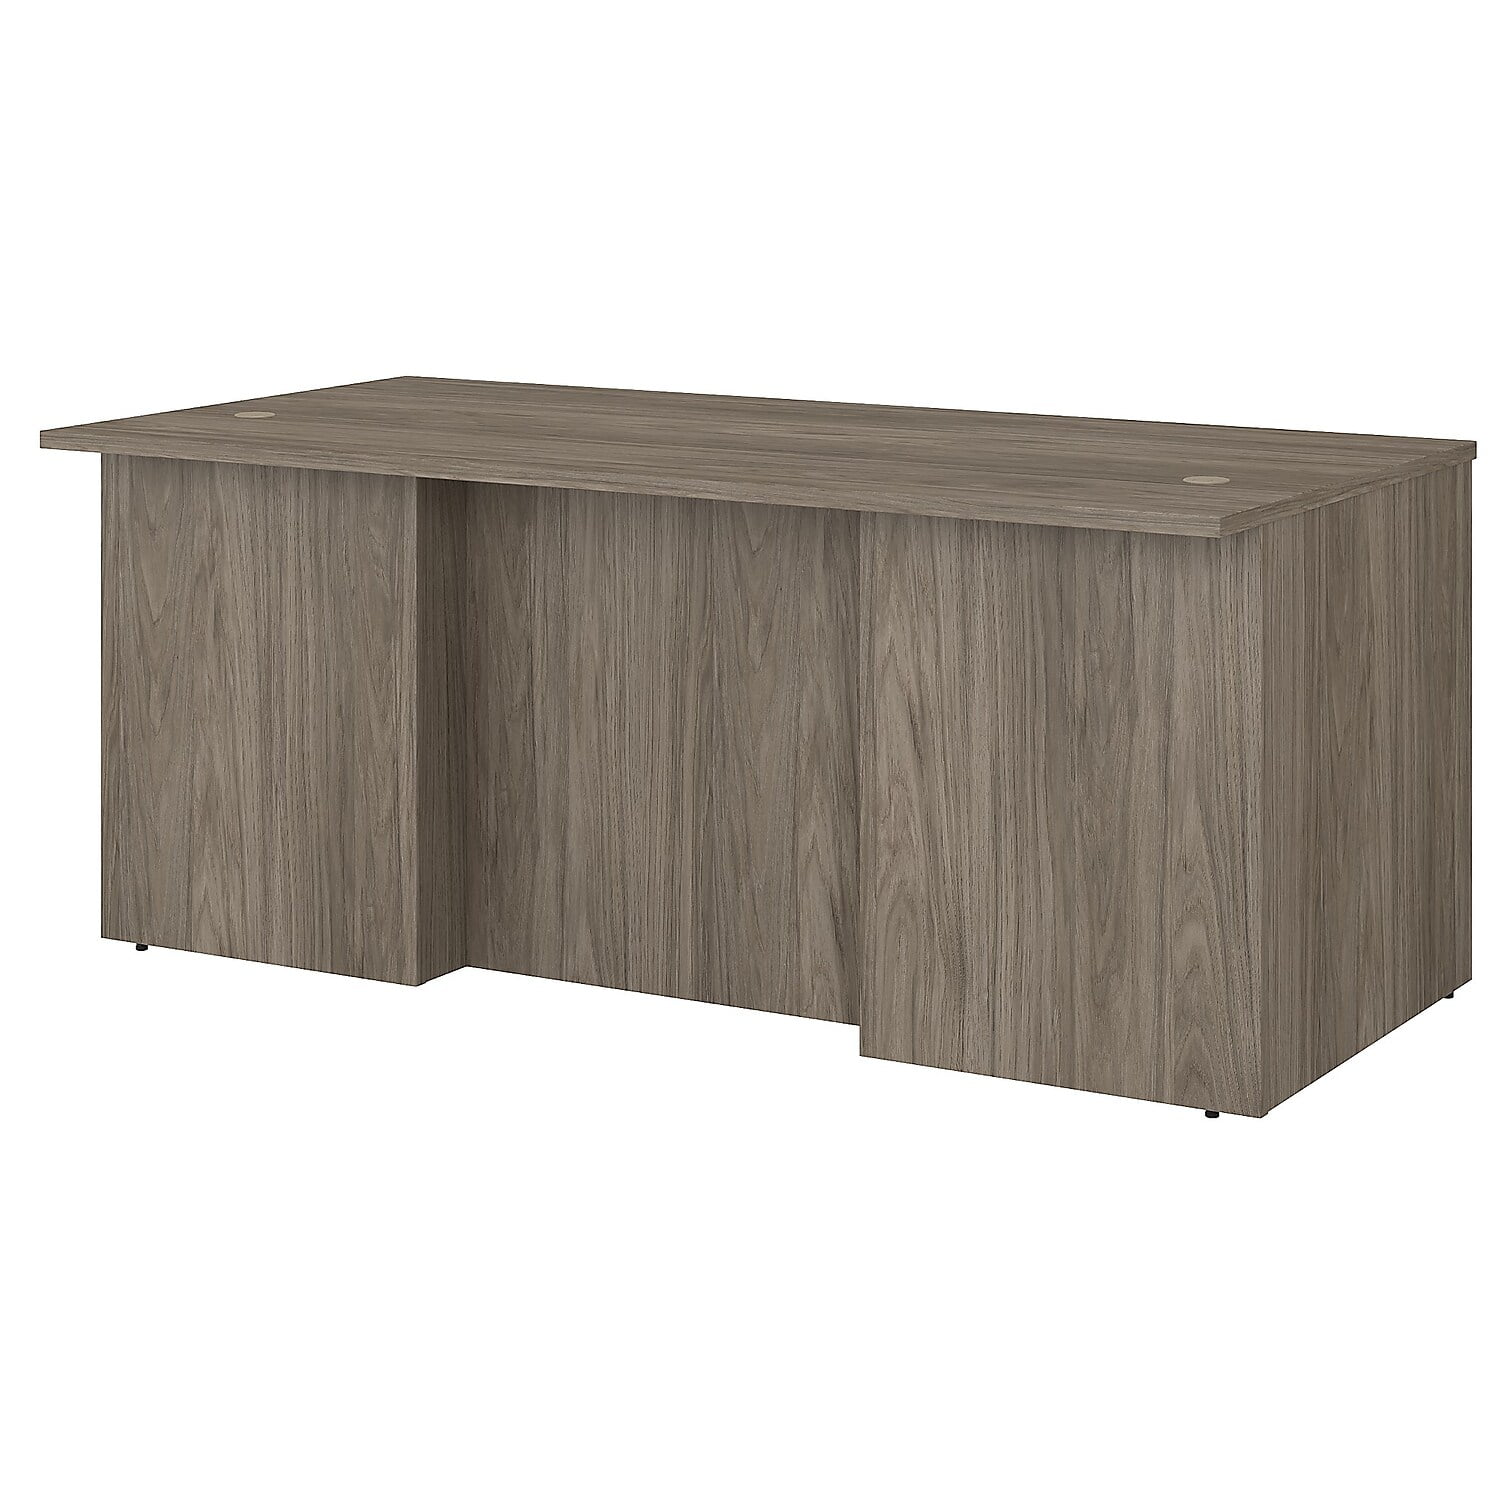 Picture of Bush Business Furniture OFD172MHK 72 x 35 x 30 in. Executive Desk, Modern Hickory